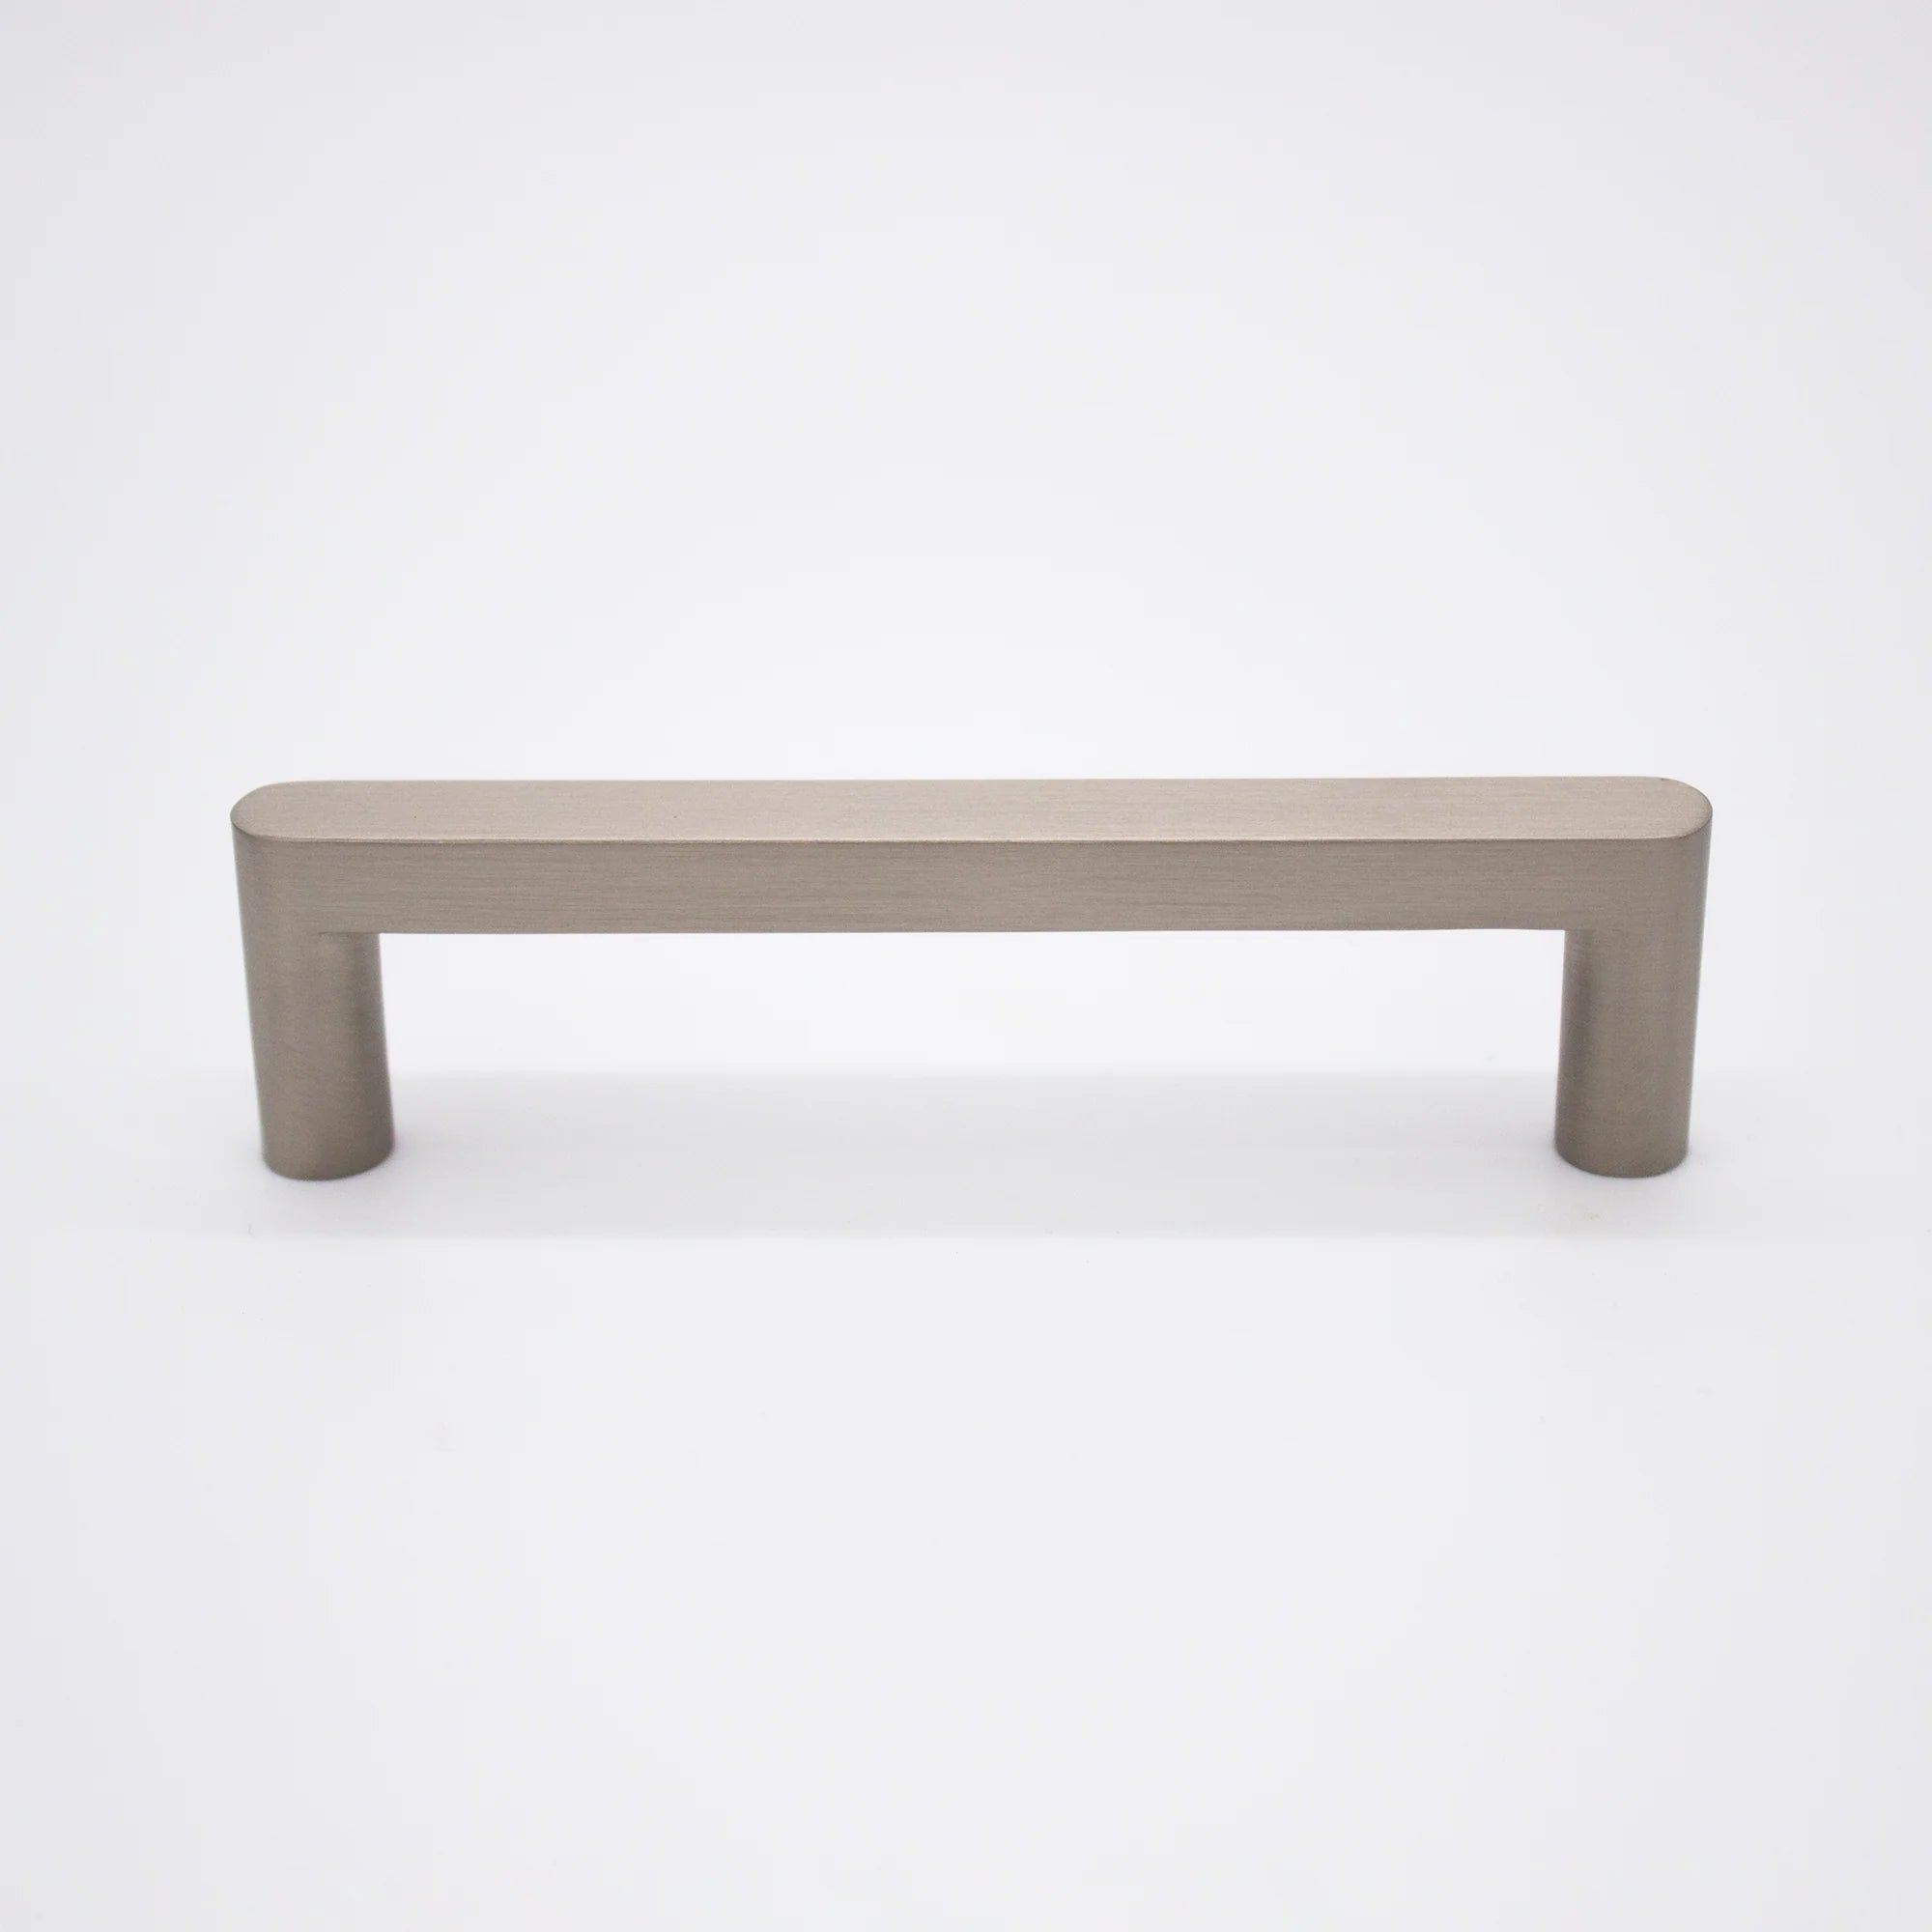 Brushed Nickel Straight Profile Cabinet Pull - Clio